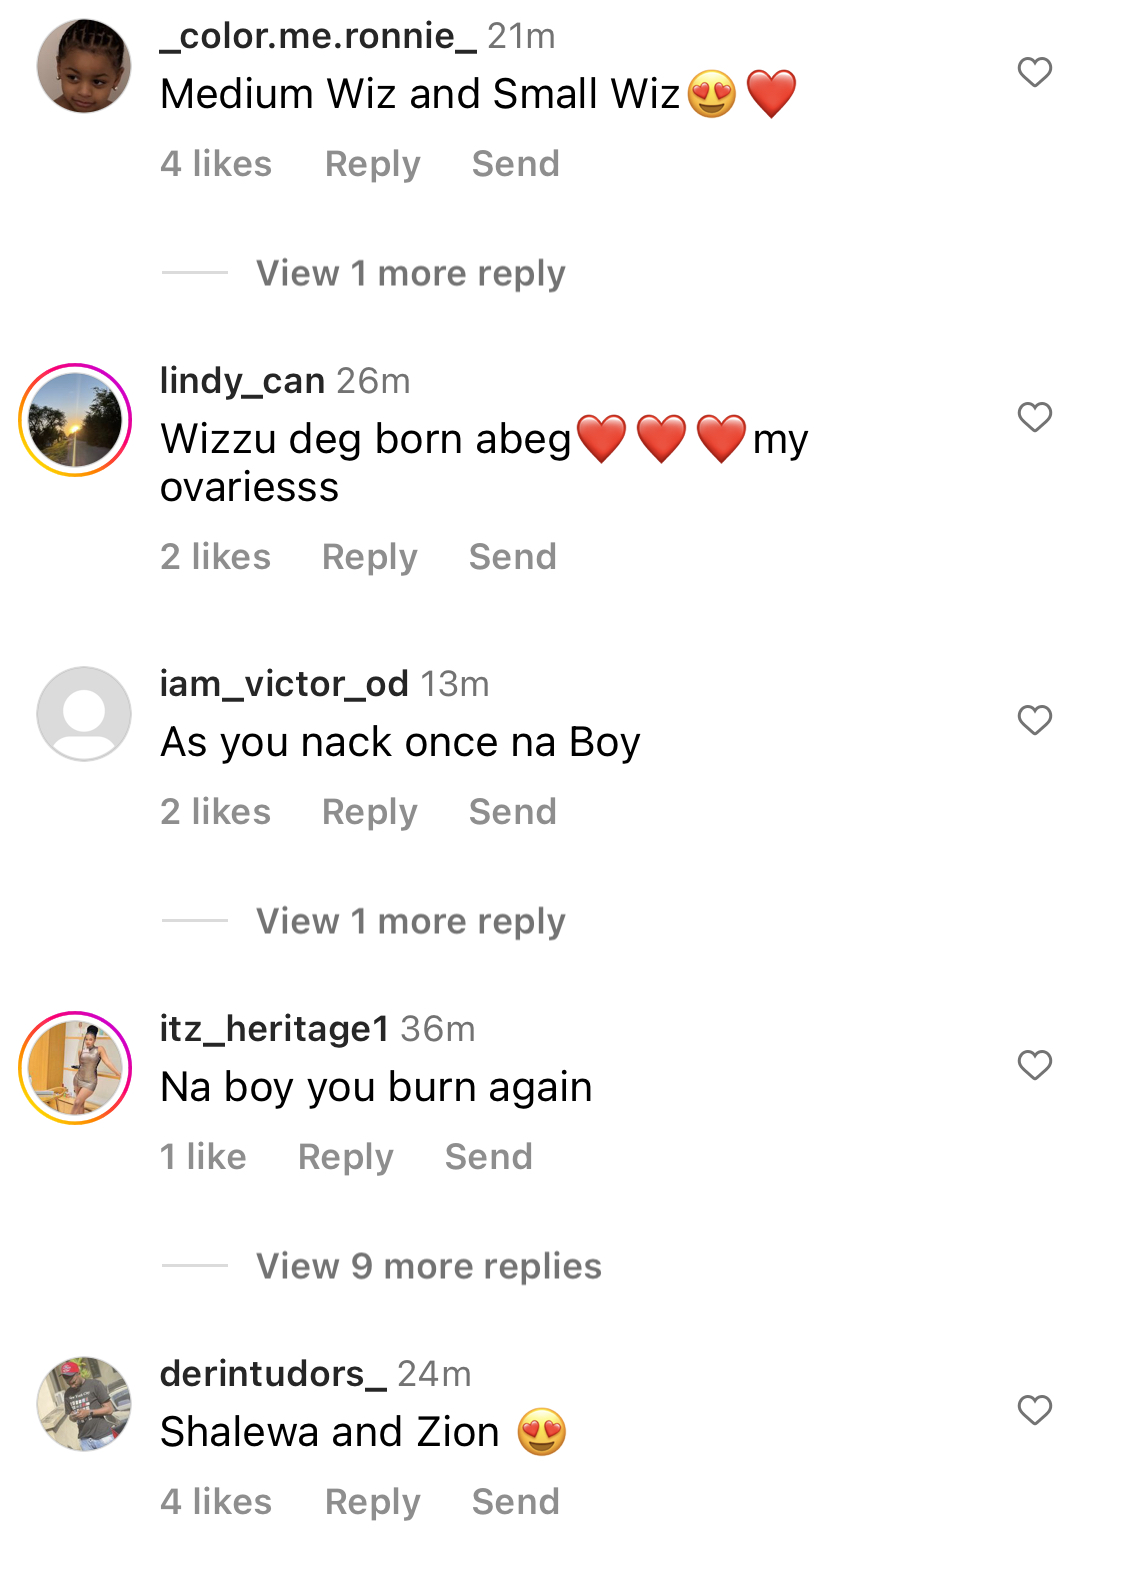 Medium and Small Wiz - Fans React as Singer Wizkid shares first photo of second son with elder brother Zion